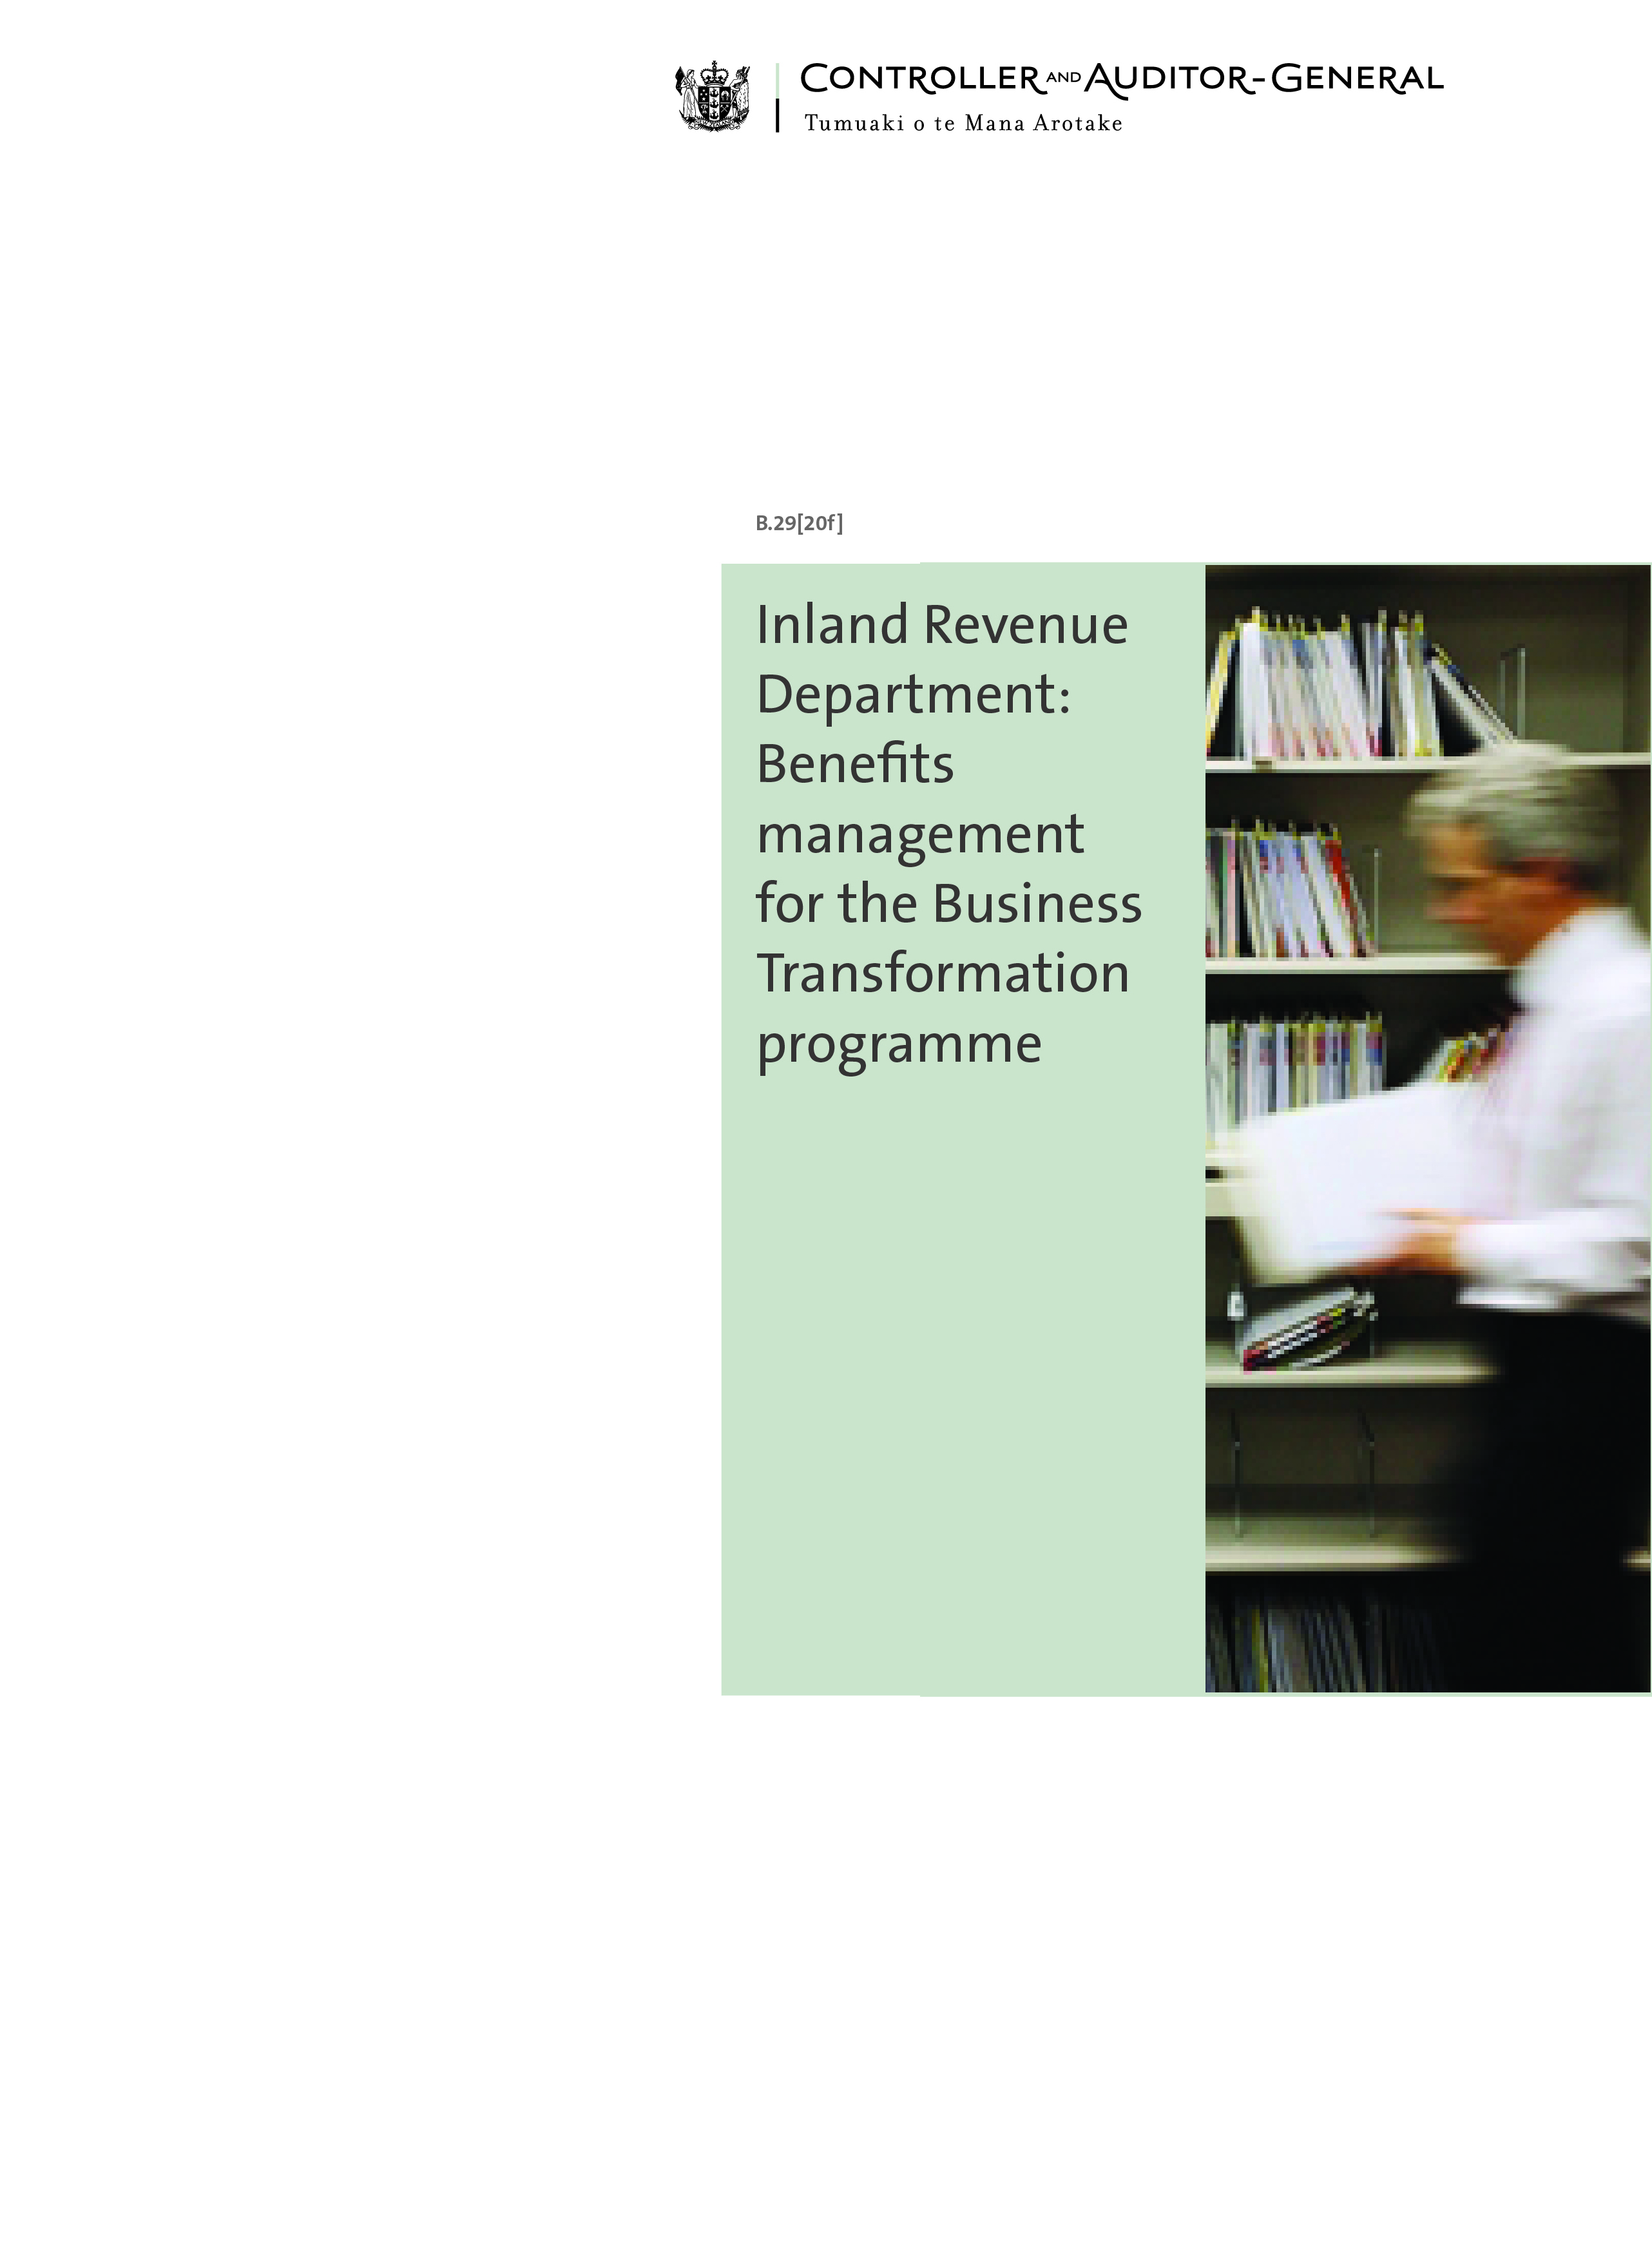 Cover of Inland Revenue Department: Benefits management for the Business Transformation programme.